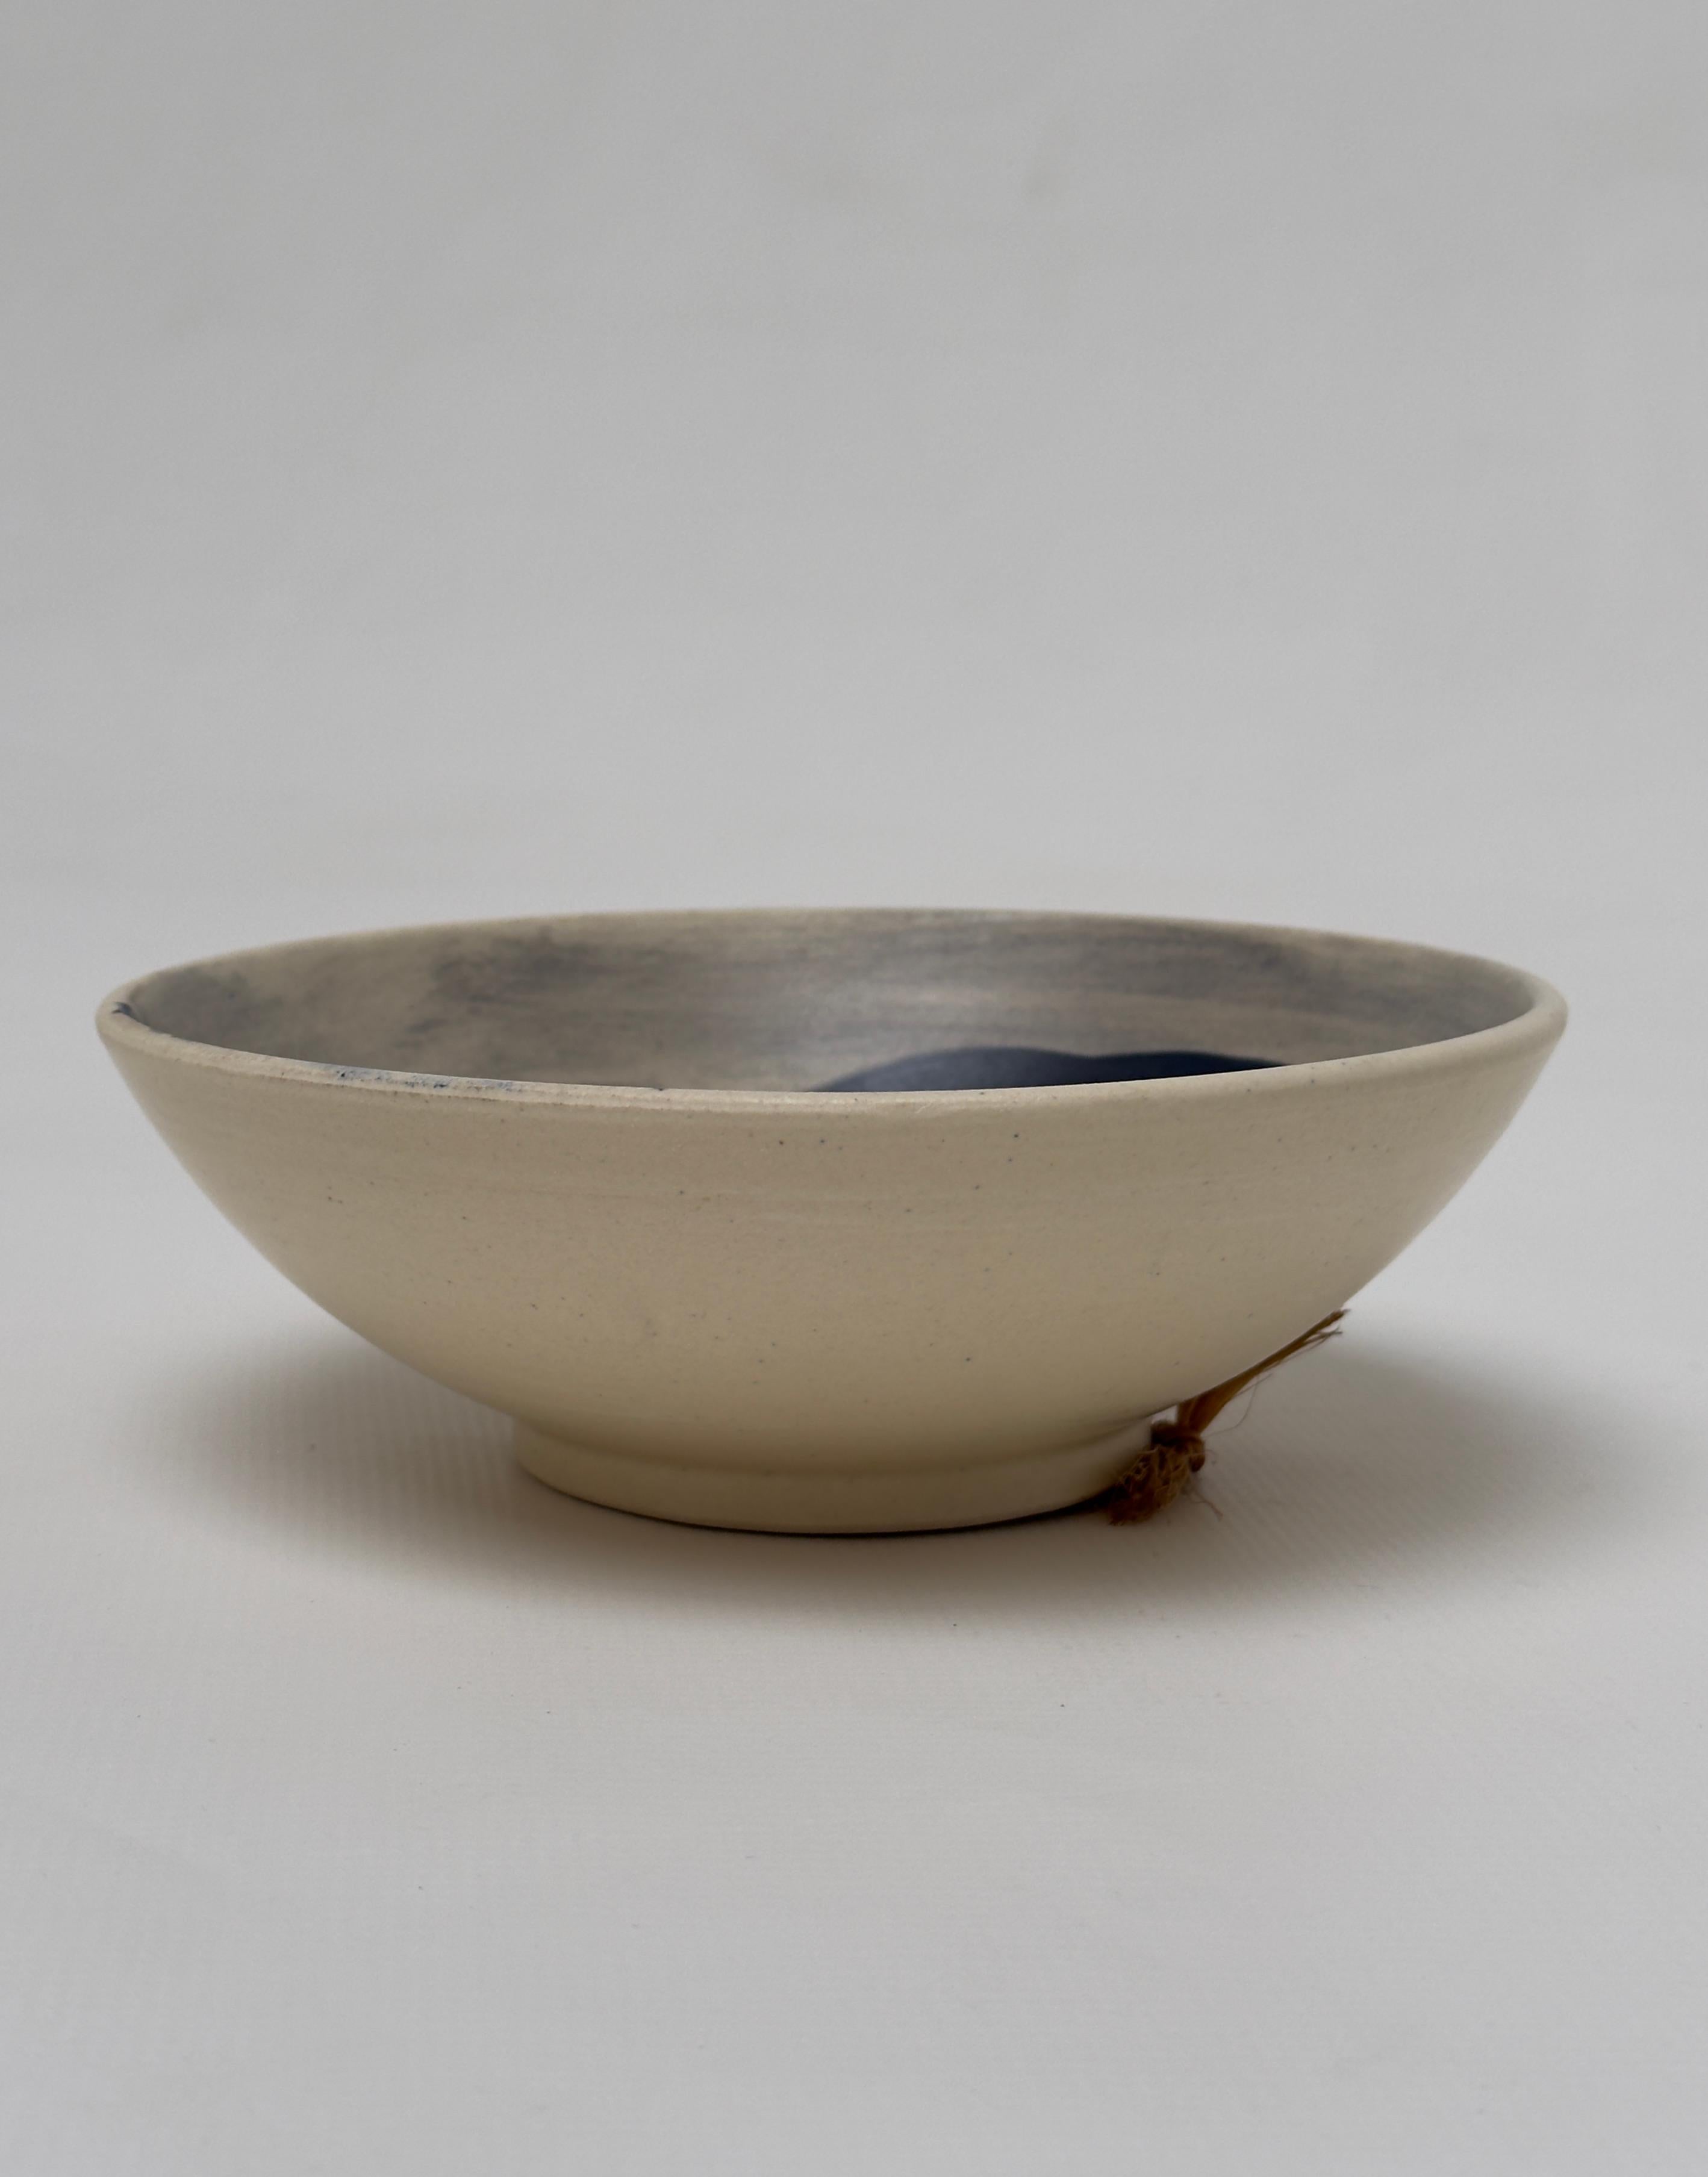 Glazed Decorative Bowl, Pyot Thiry, Vallauris c. 1960 For Sale